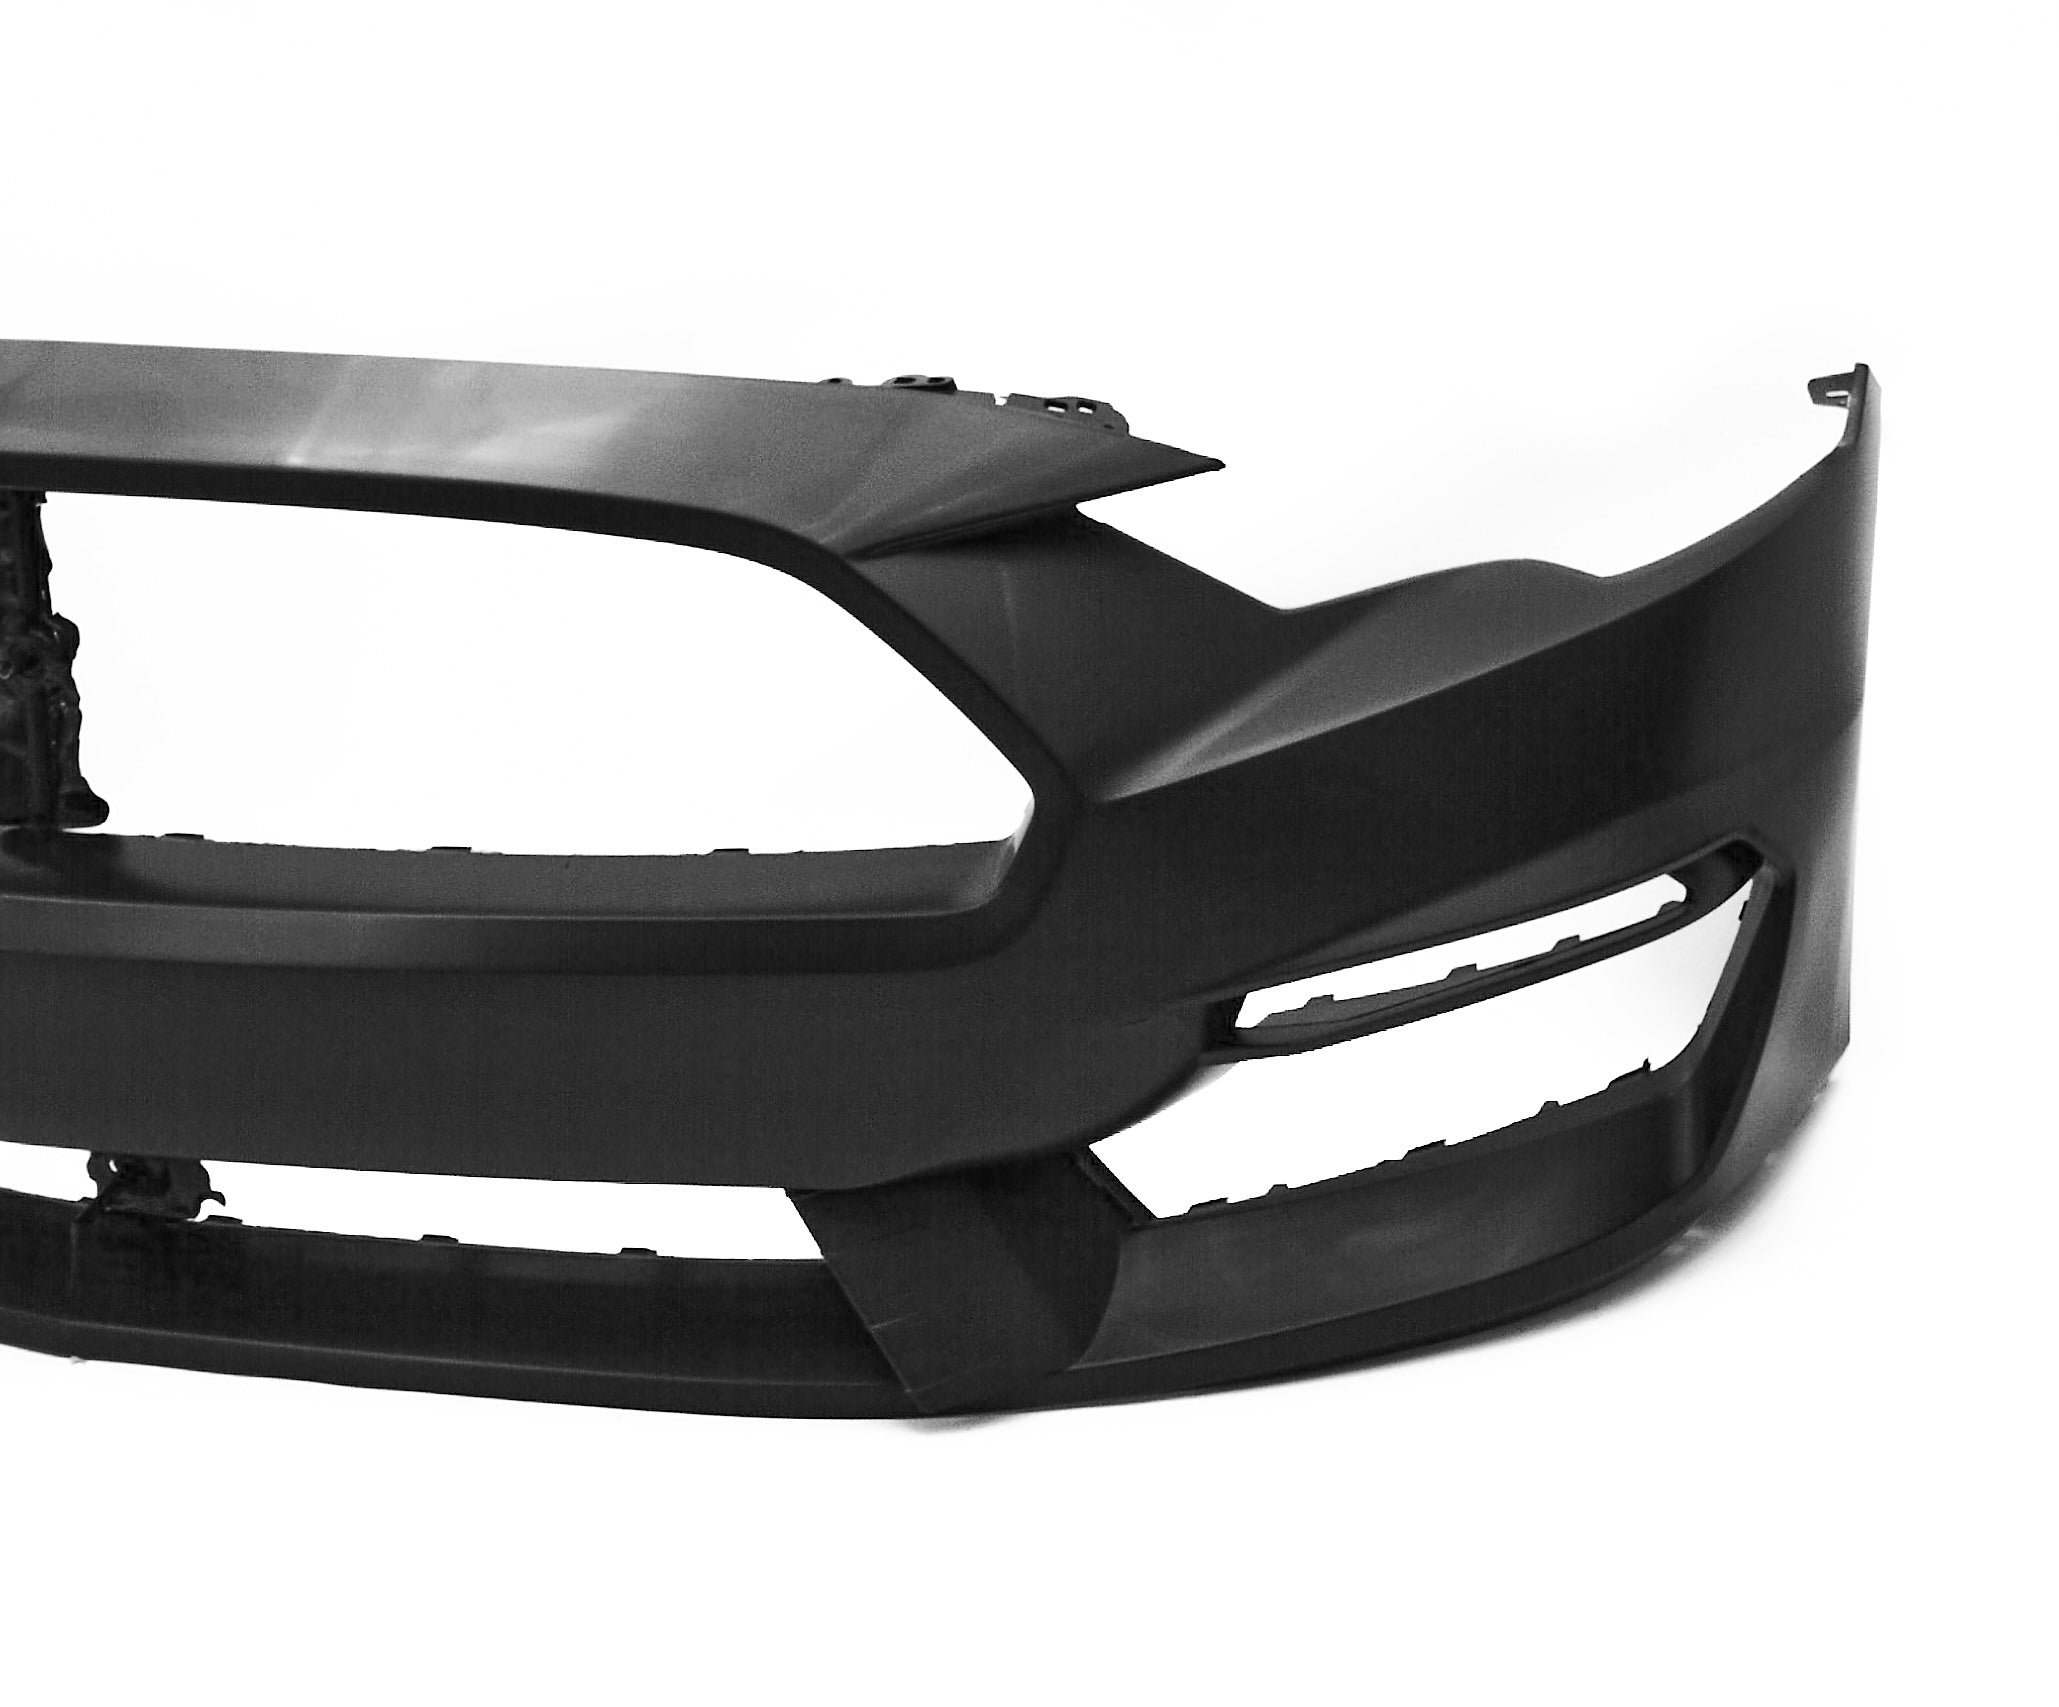 MP Concepts S550 Mustang Mach 1 Style Front Bumper Kit